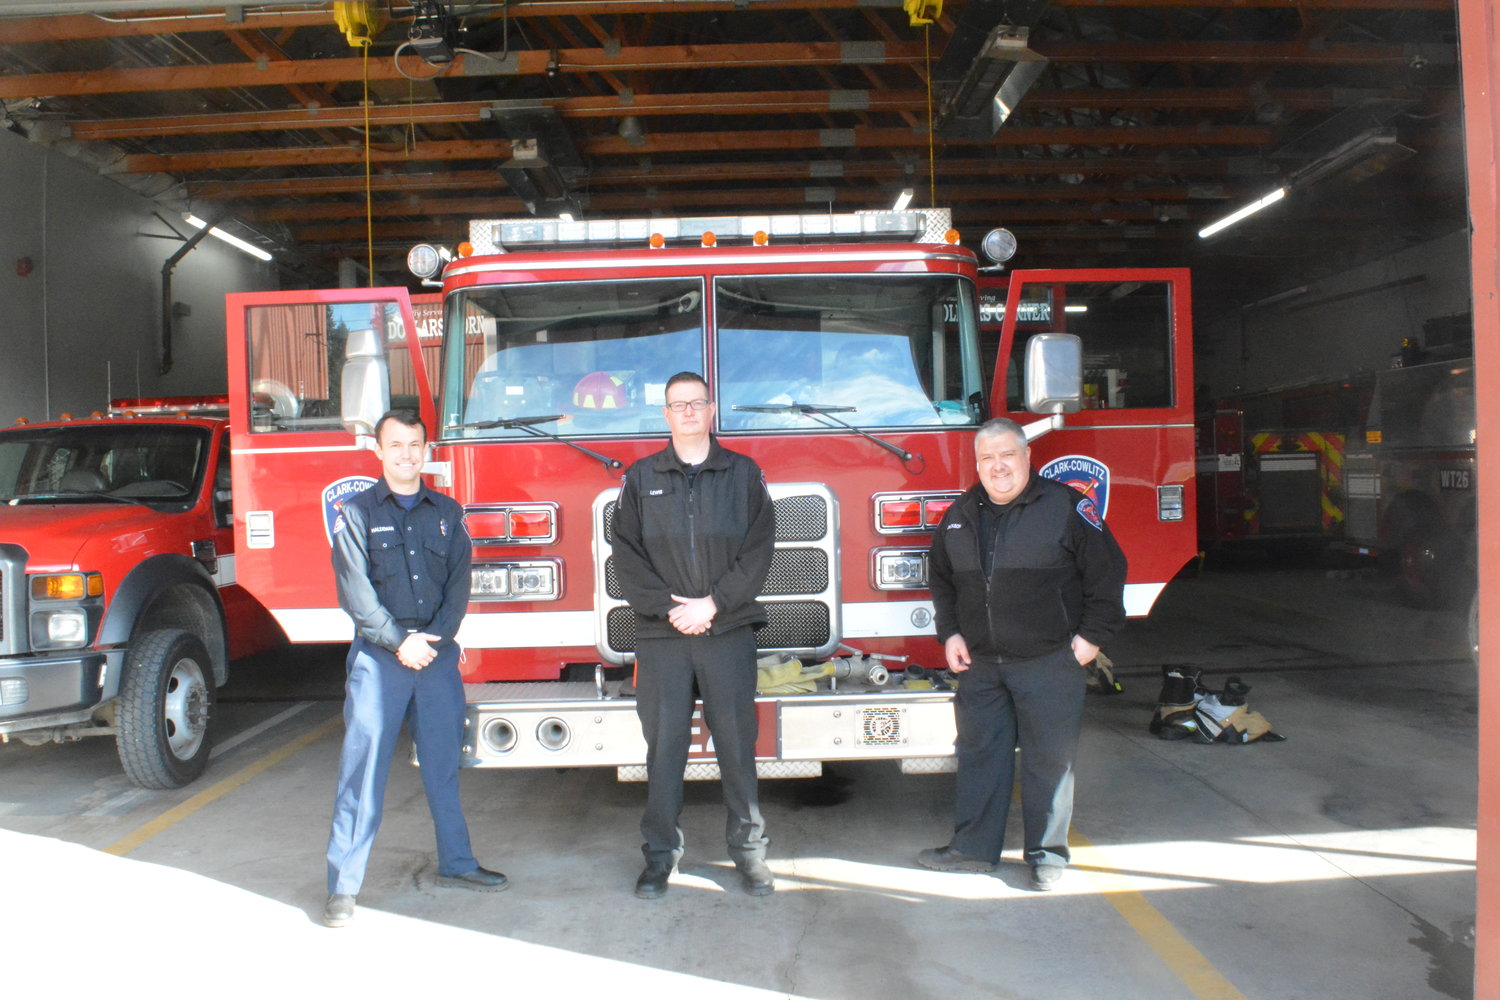 photo by Sebastian Rubino
Josh Haldeman, Sam Lewis, and Mike Jackson, all from Clark-Cowlitz Fire Rescue, are pictured in front of fire engine 26.